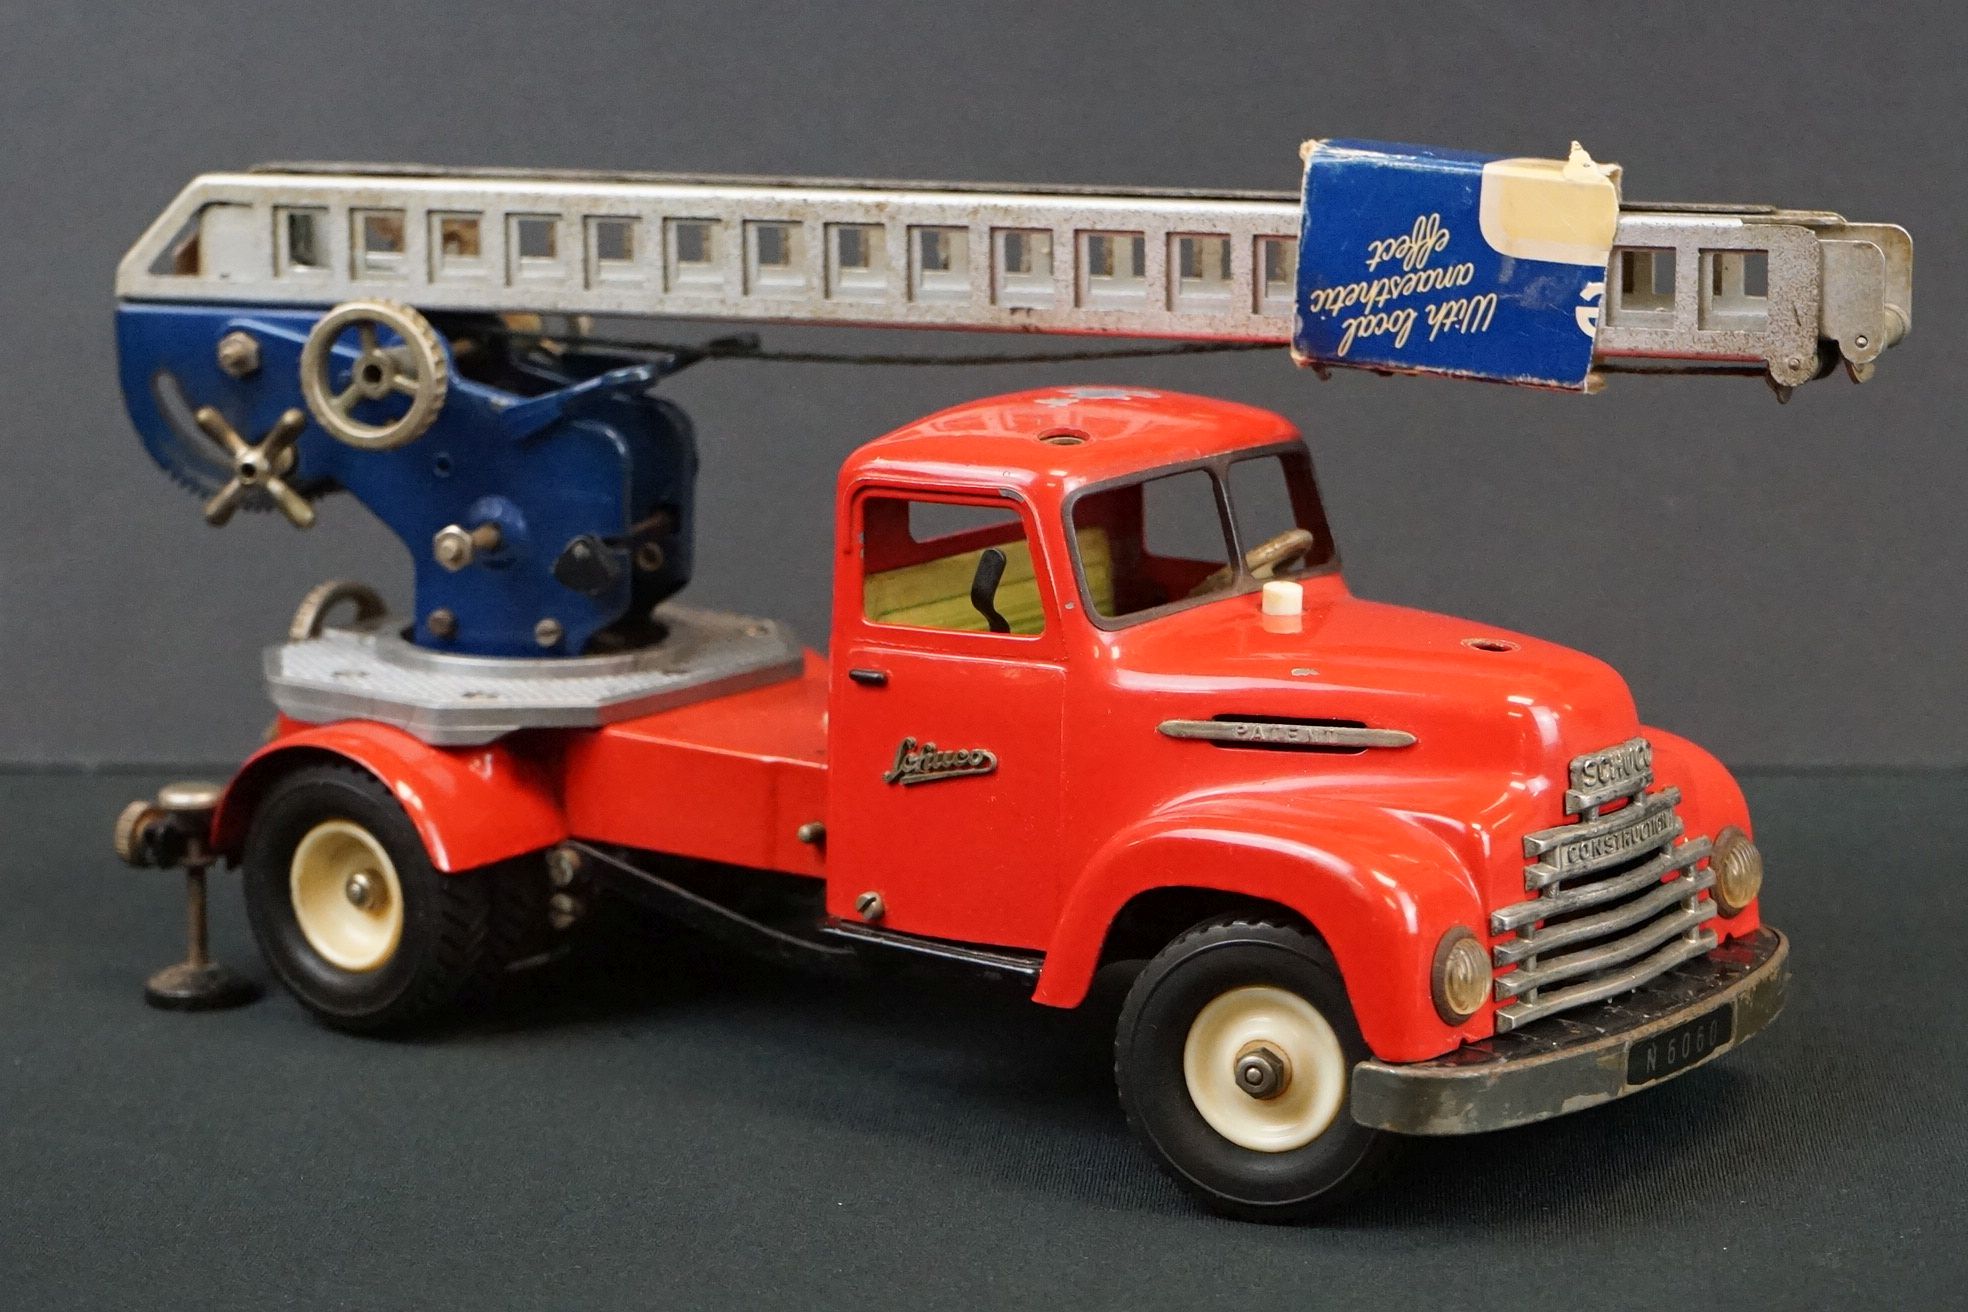 Original tin plate Schuco Pracision electro construction fire engine model in red, with extending - Bild 2 aus 10